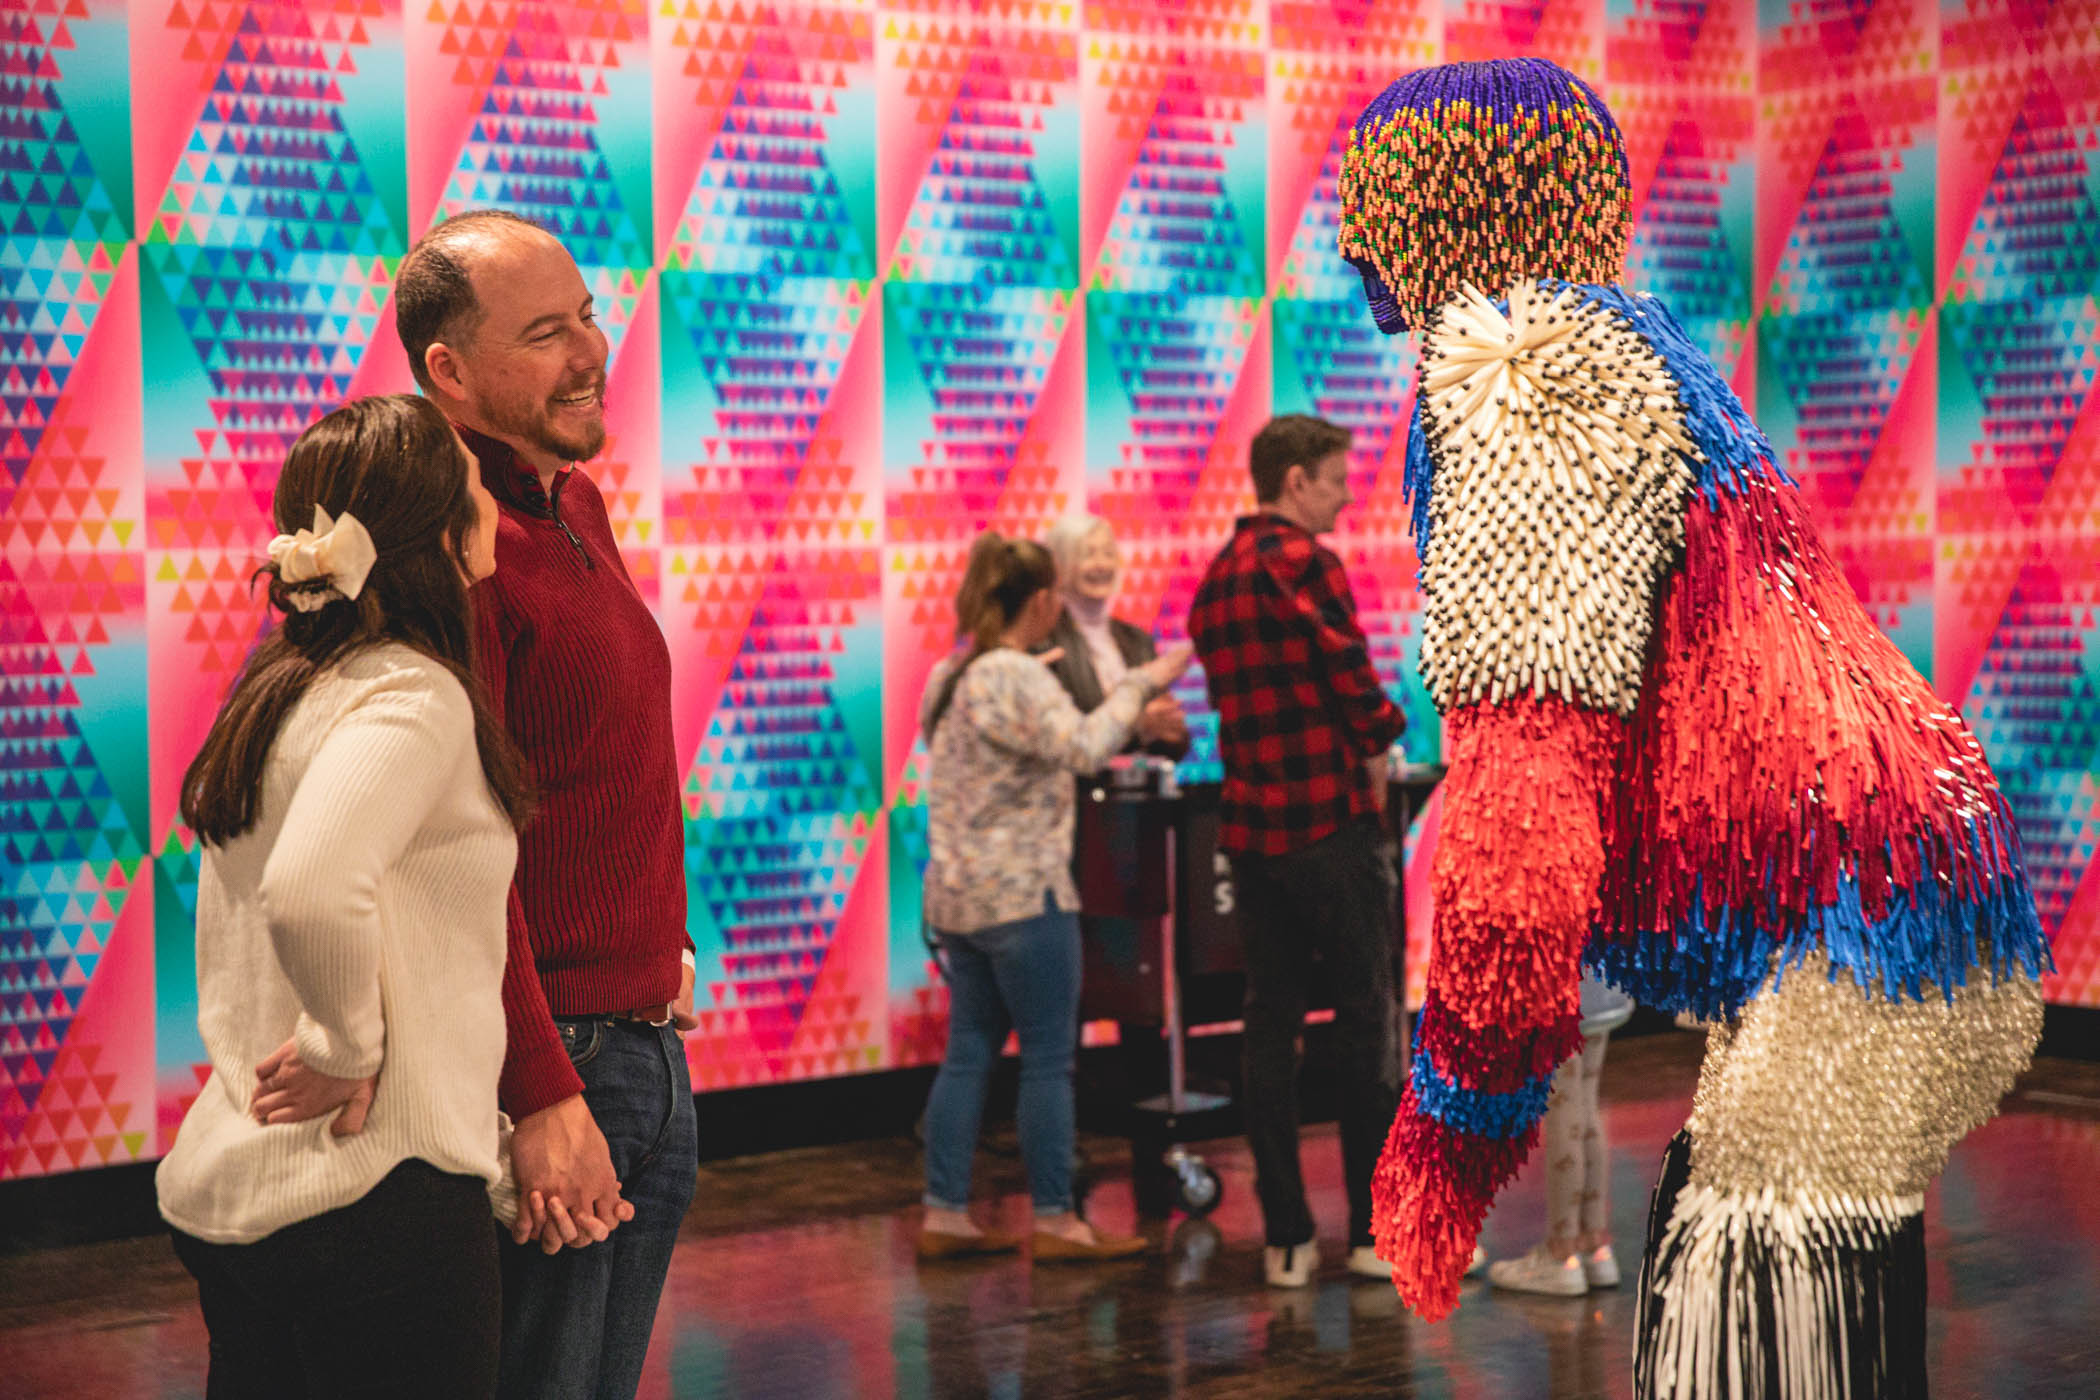 Couple holding hands smiling while looking at the large beaded creature in the gallery